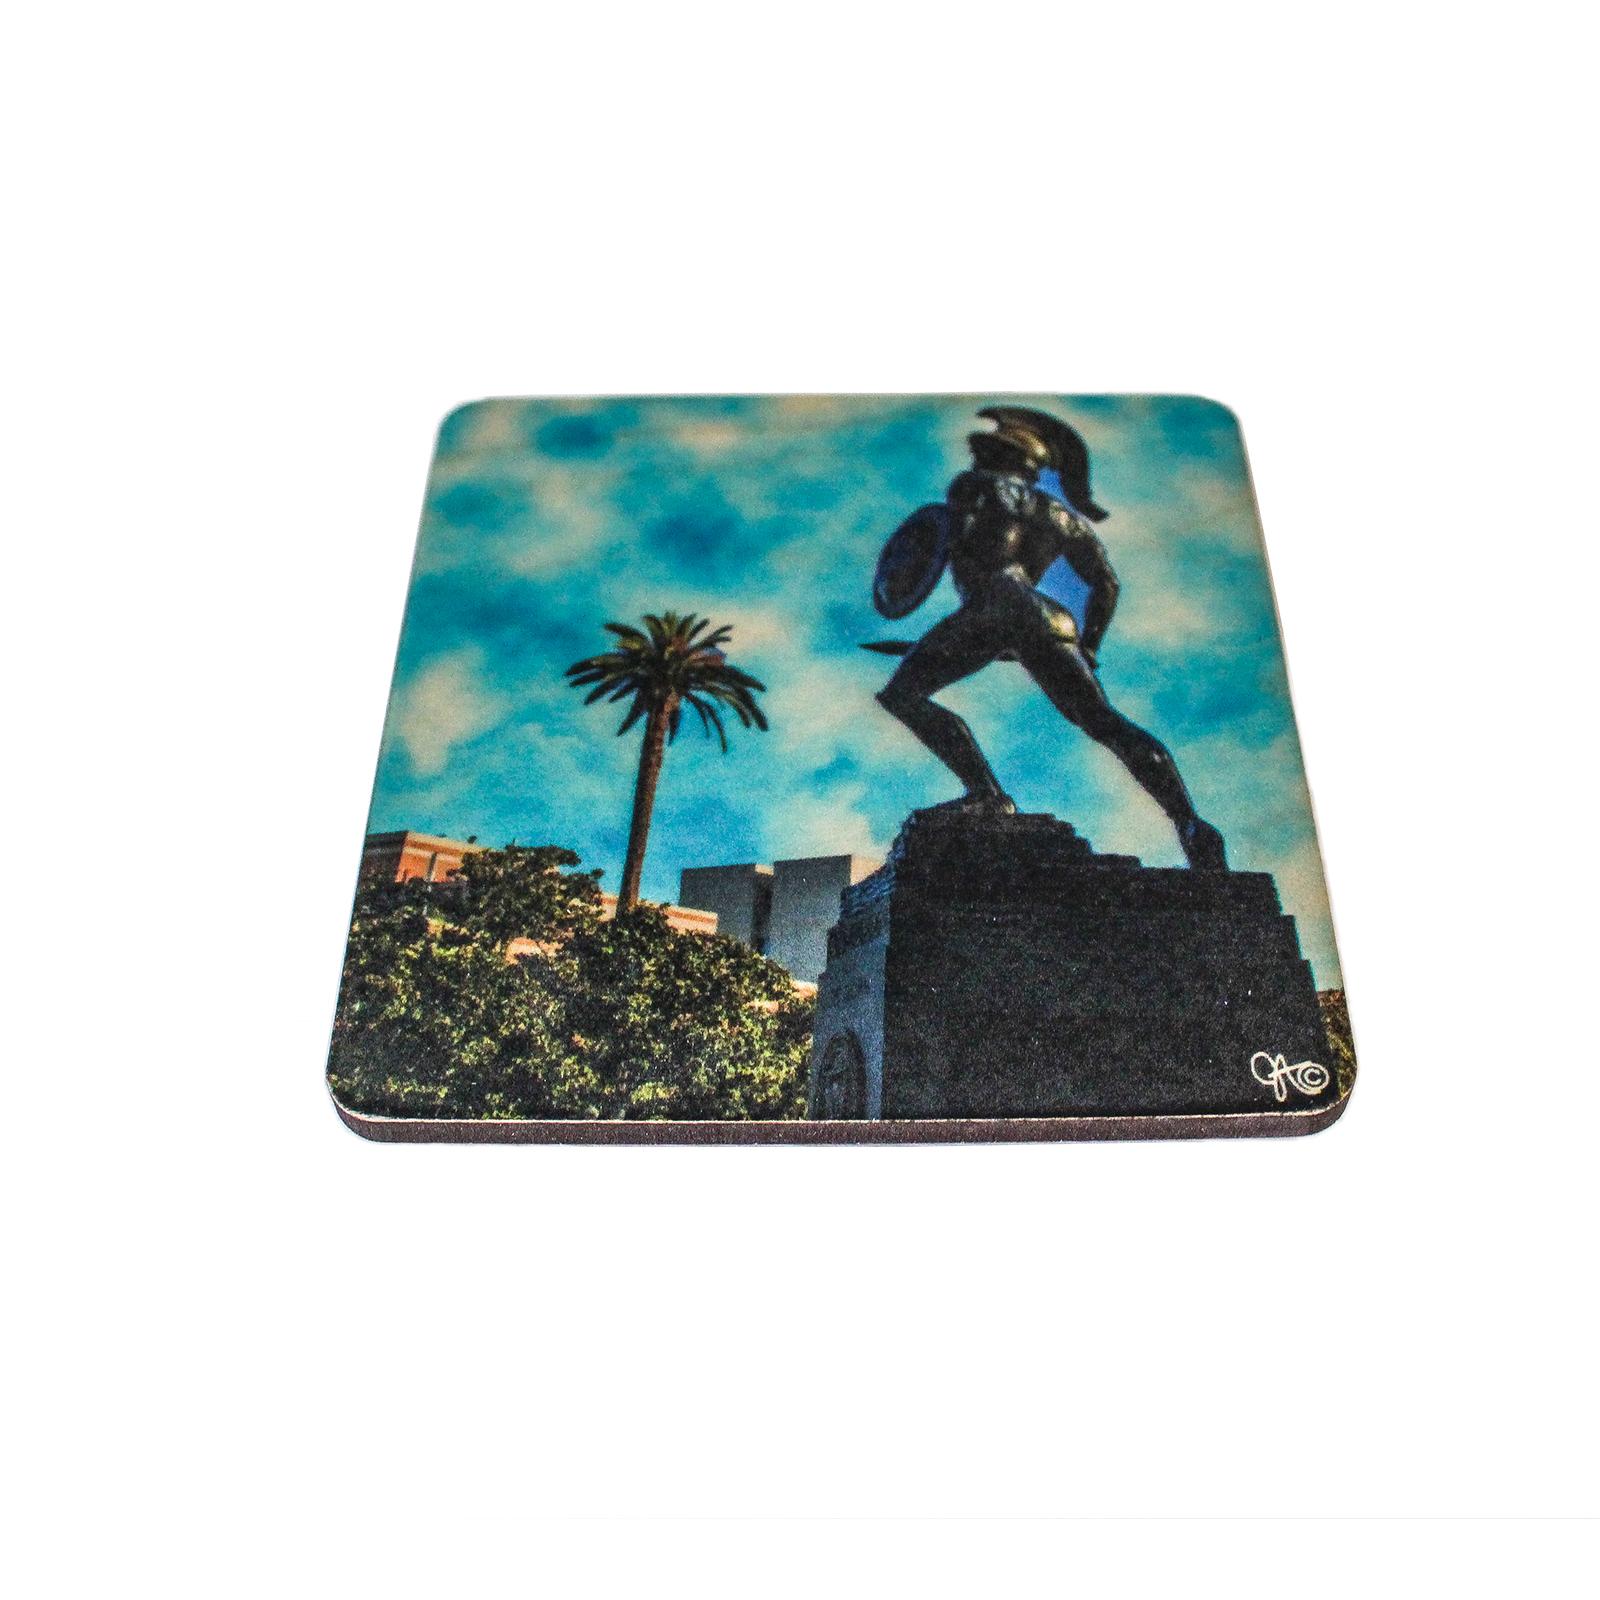 USC Tommy Silhouette Wooden Coaster by Preserve Press image01